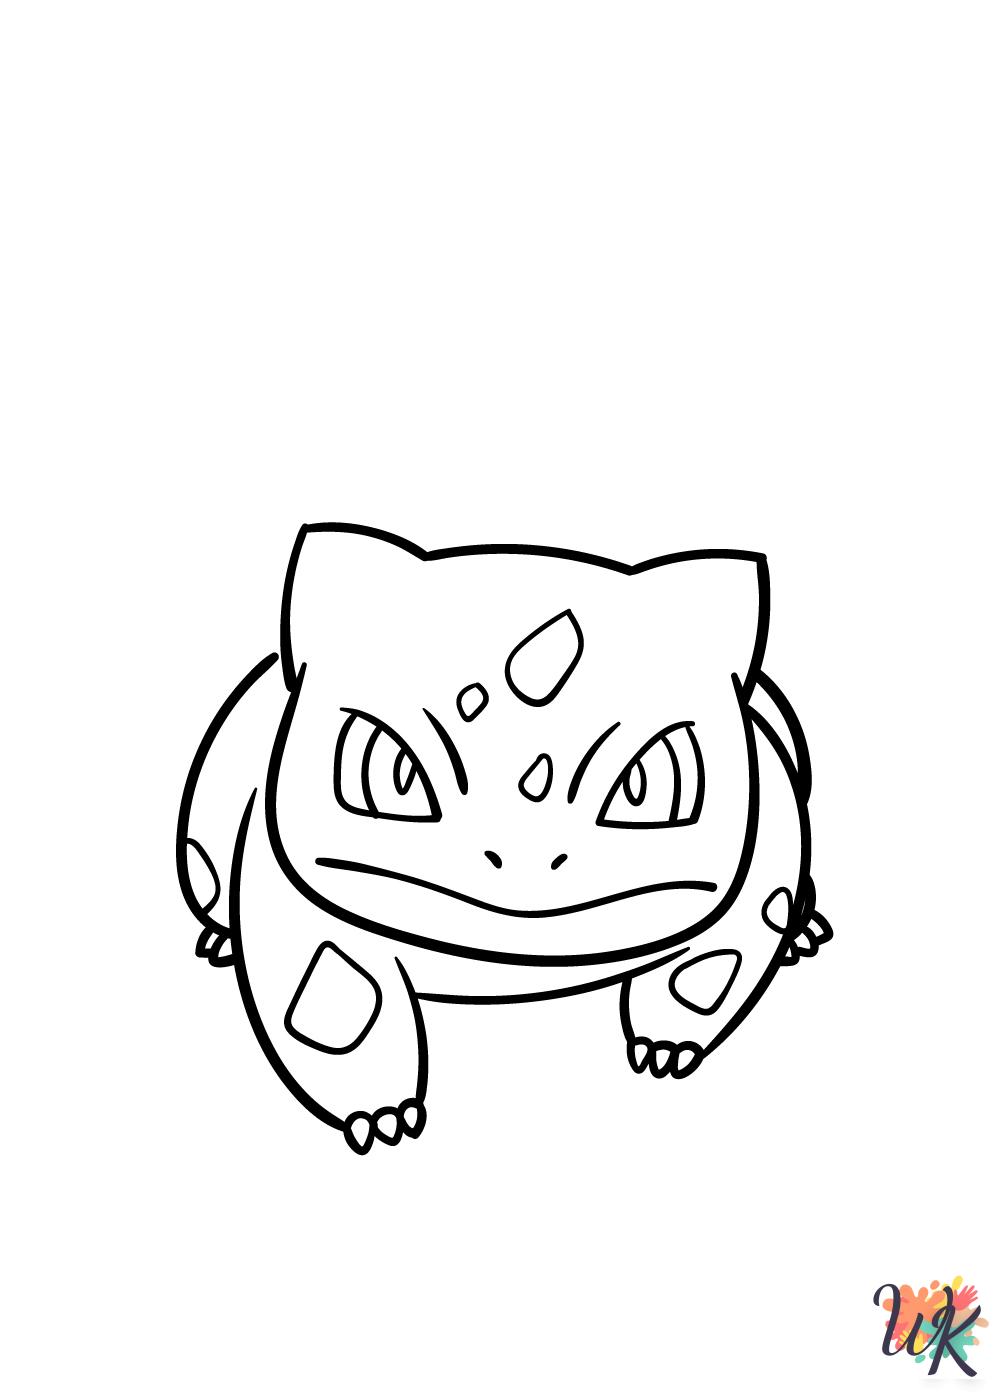 Bulbasaur themed coloring pages